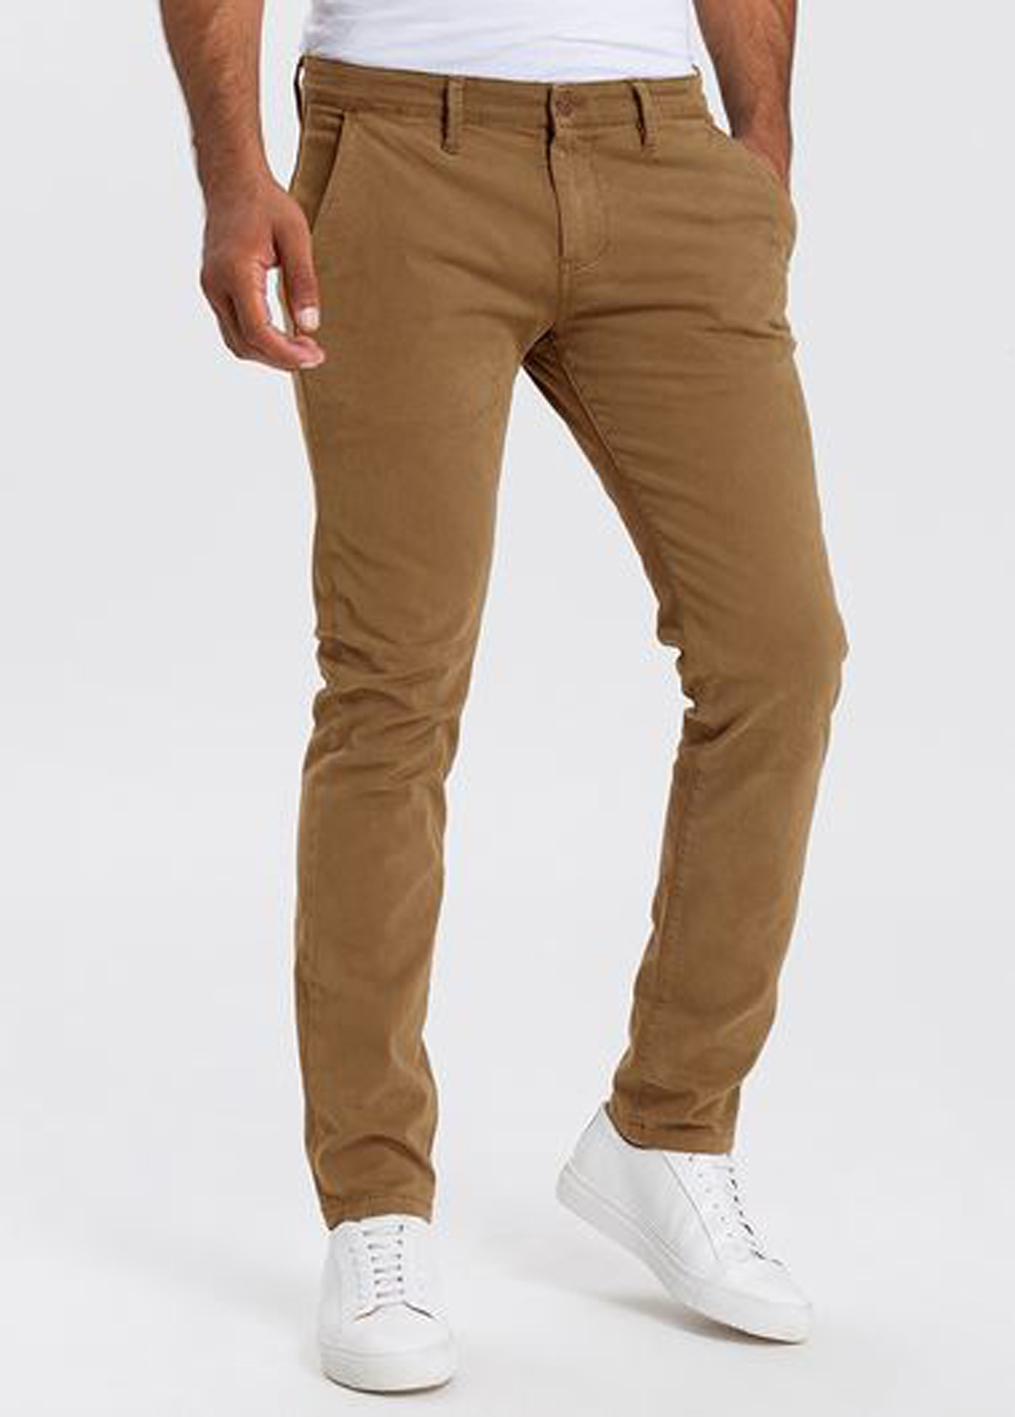 Cross Chino Hose Tapered Fit camel von Cross